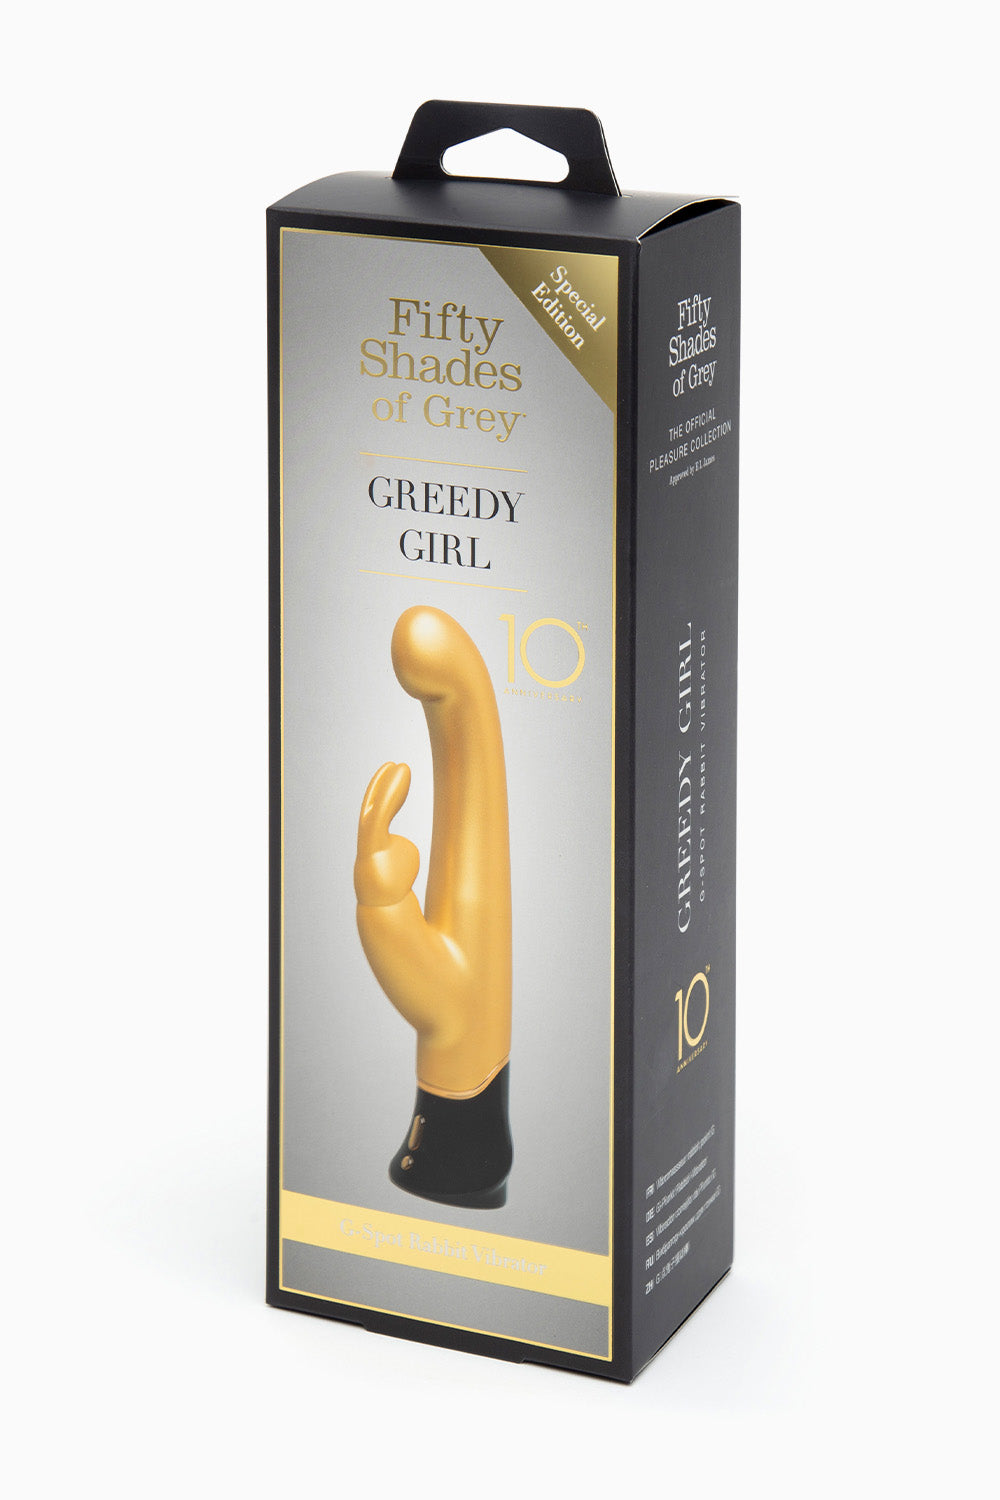 Fifty Shades of Grey Greedy Girl G-Spot Rabbit Vibrator Gold, 10 Inches